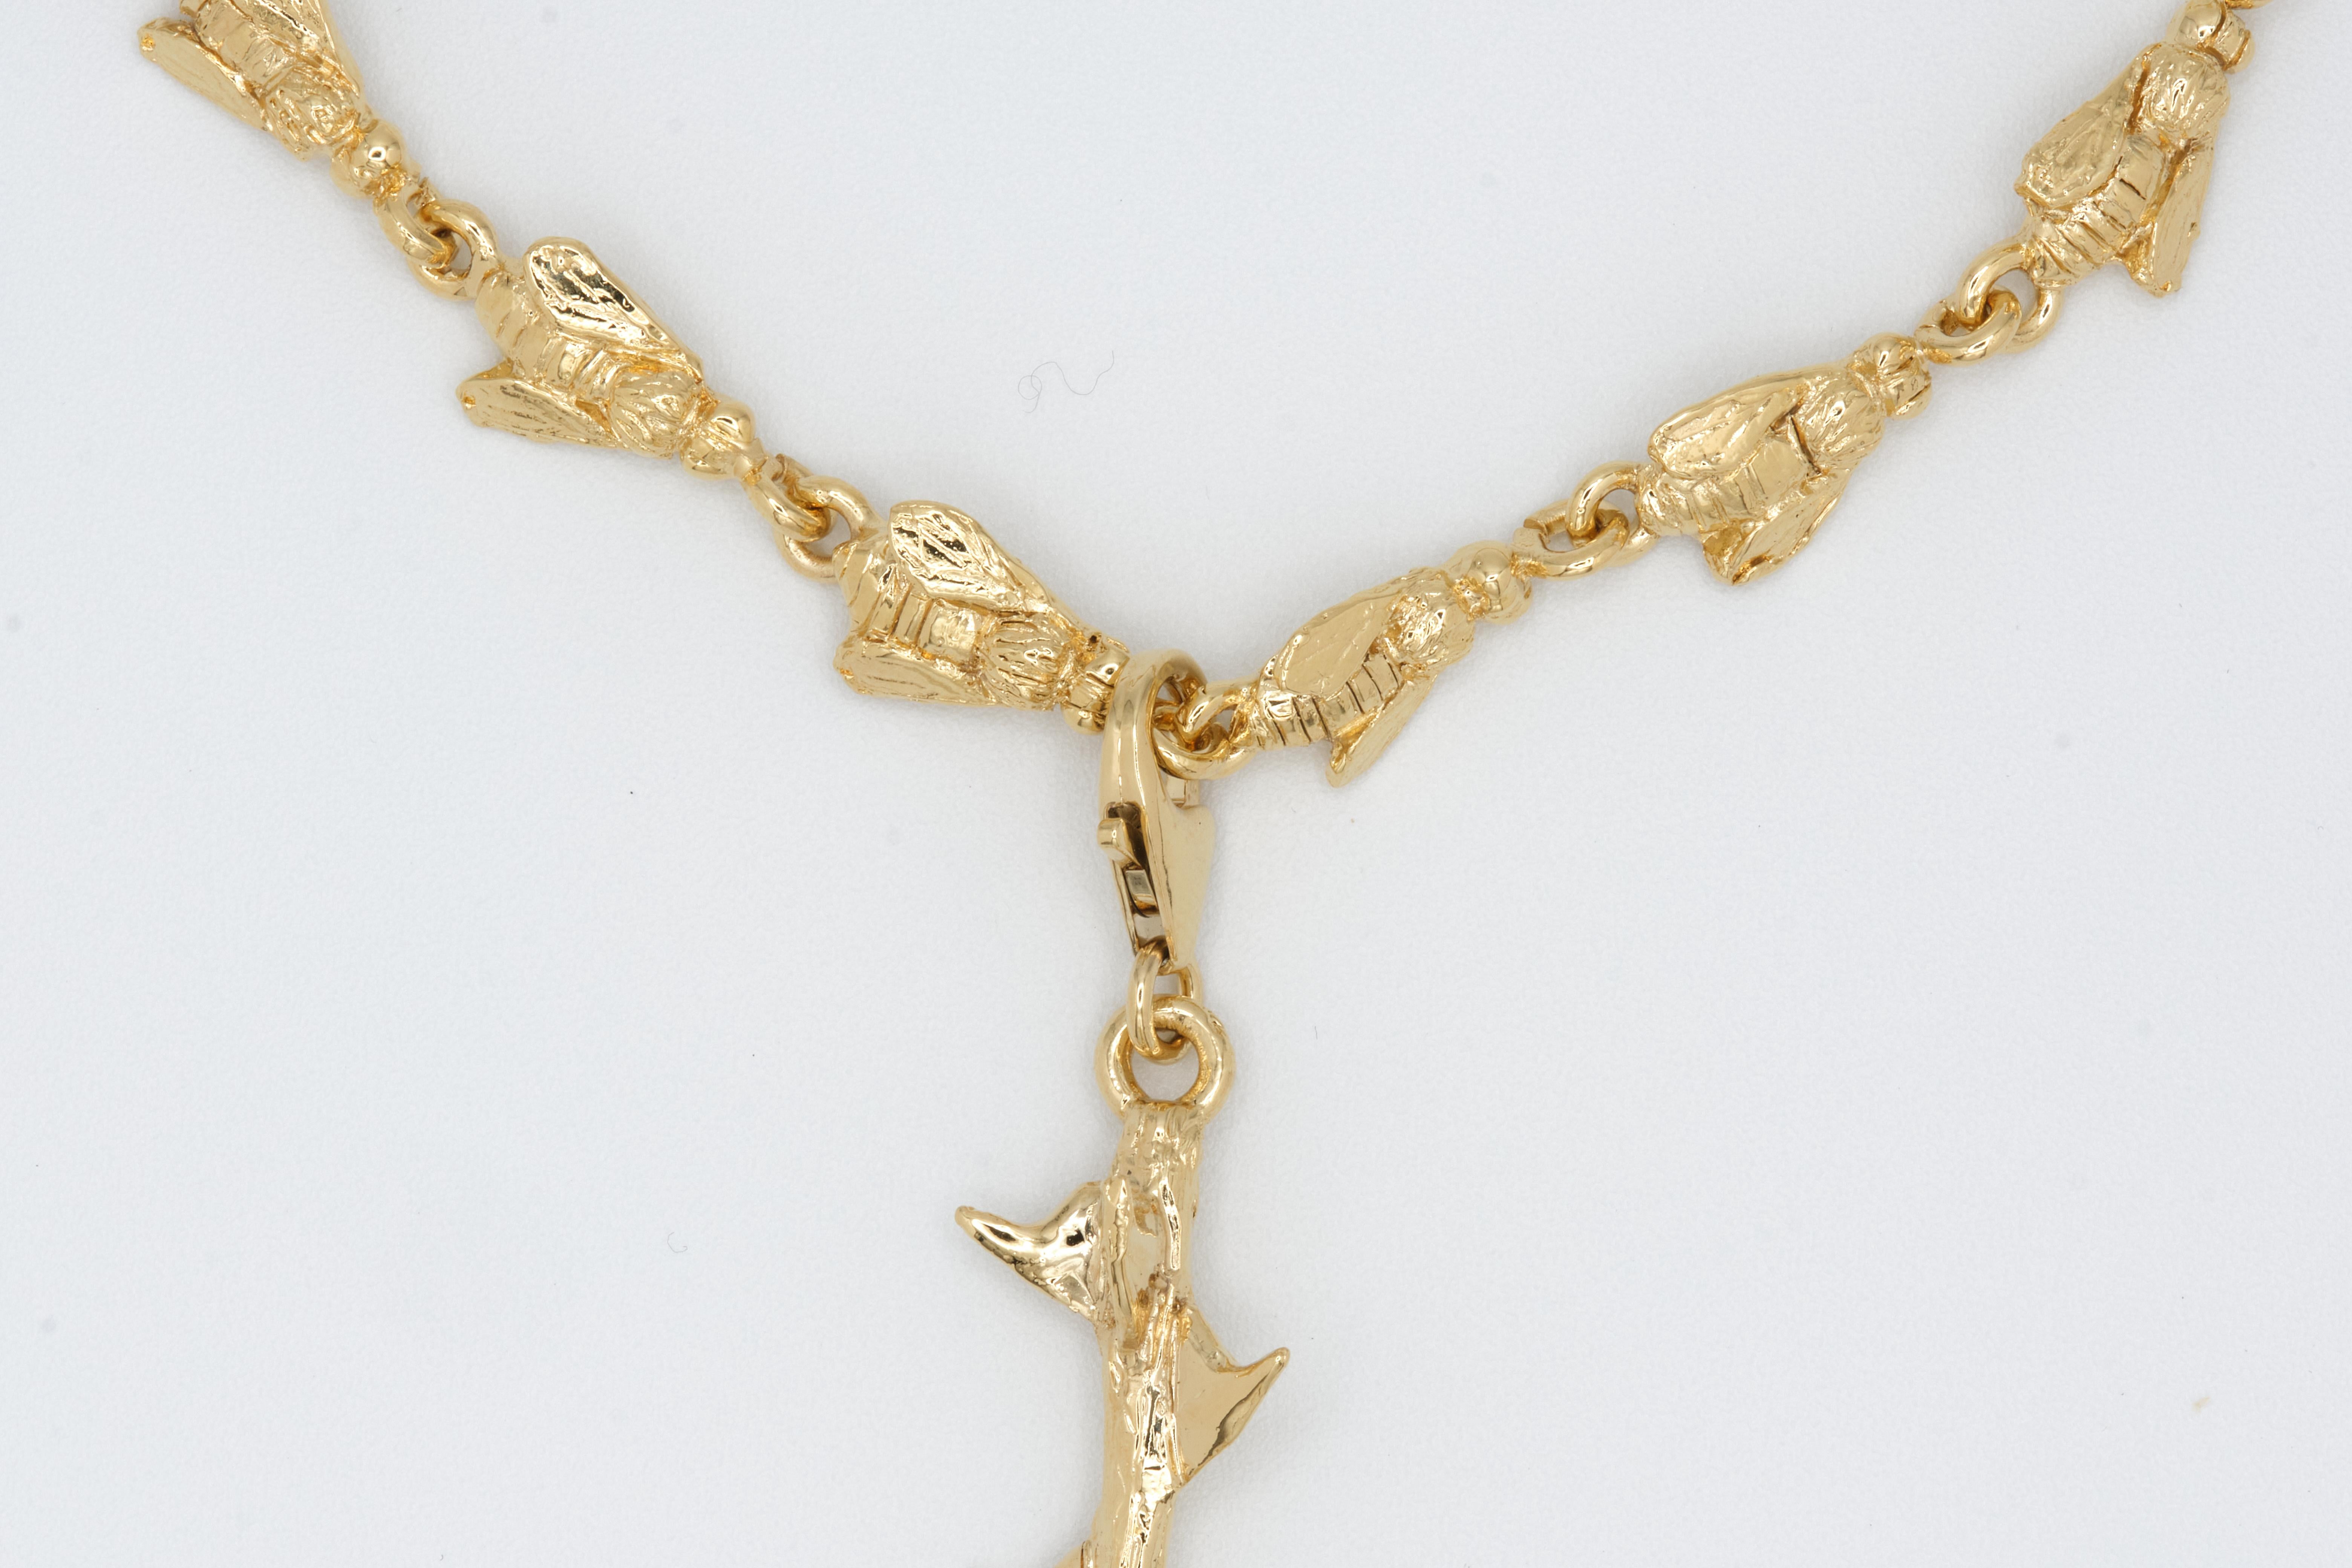 Necklace and Pendant in 14 Kt Gold  Devotion of 